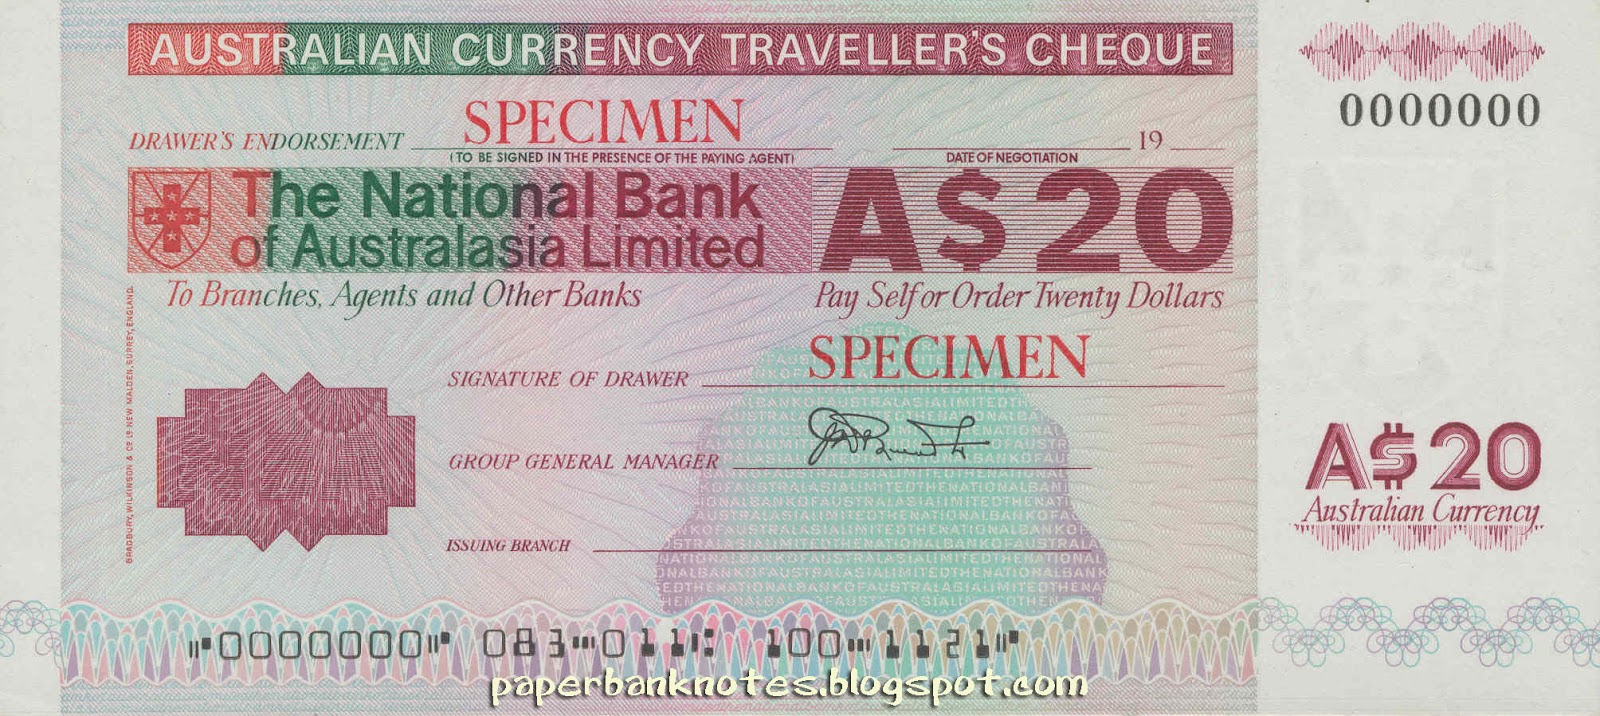 travellers cheques post office